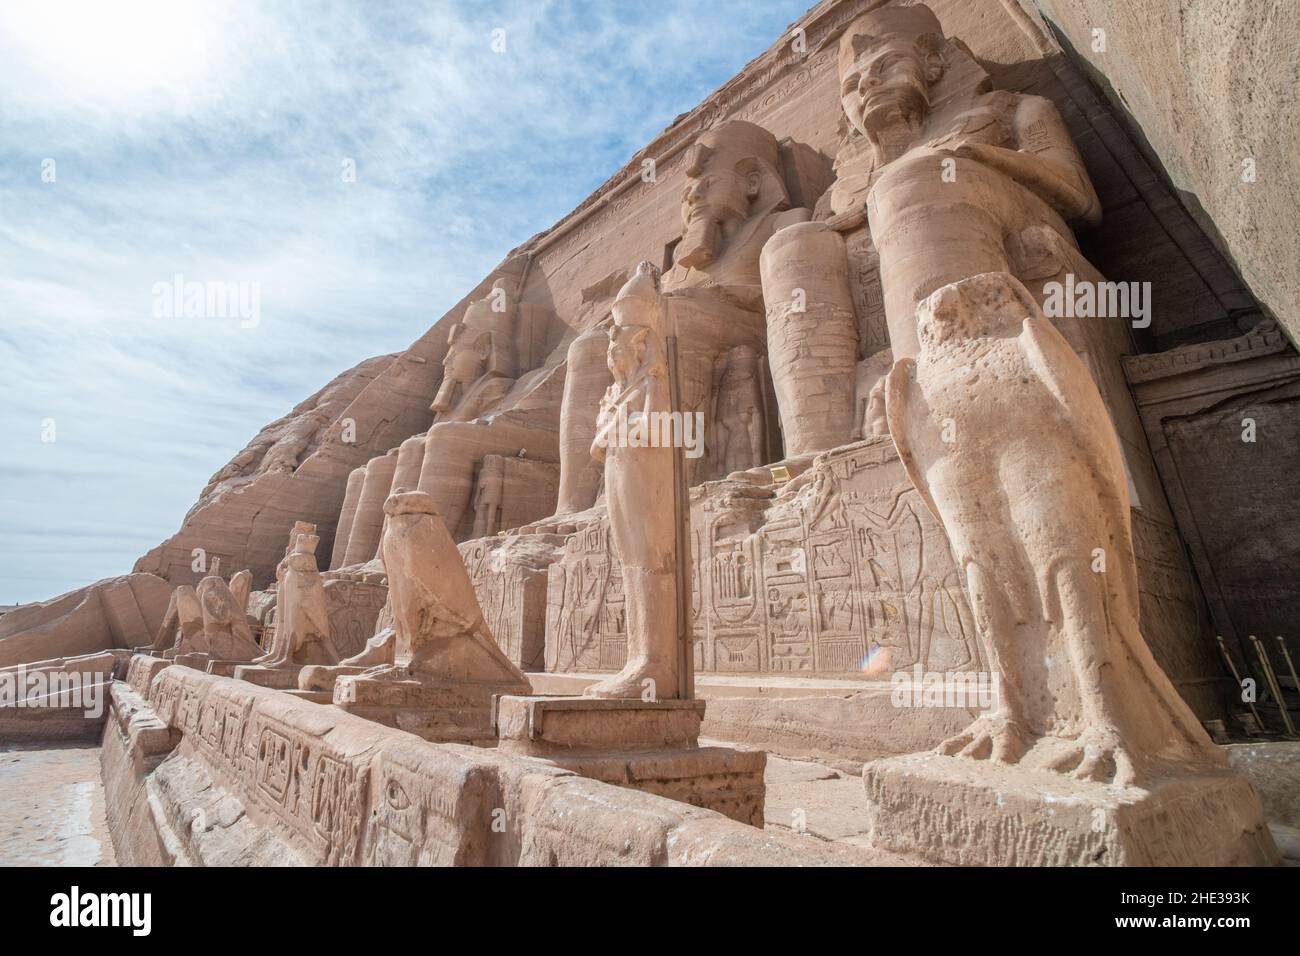 Great Temple of Ramesses II at Abu Simbel in Southern Egypt near the Border of Sudan. A UNESCO world heritage site, one of the Nubian monuments. Stock Photo